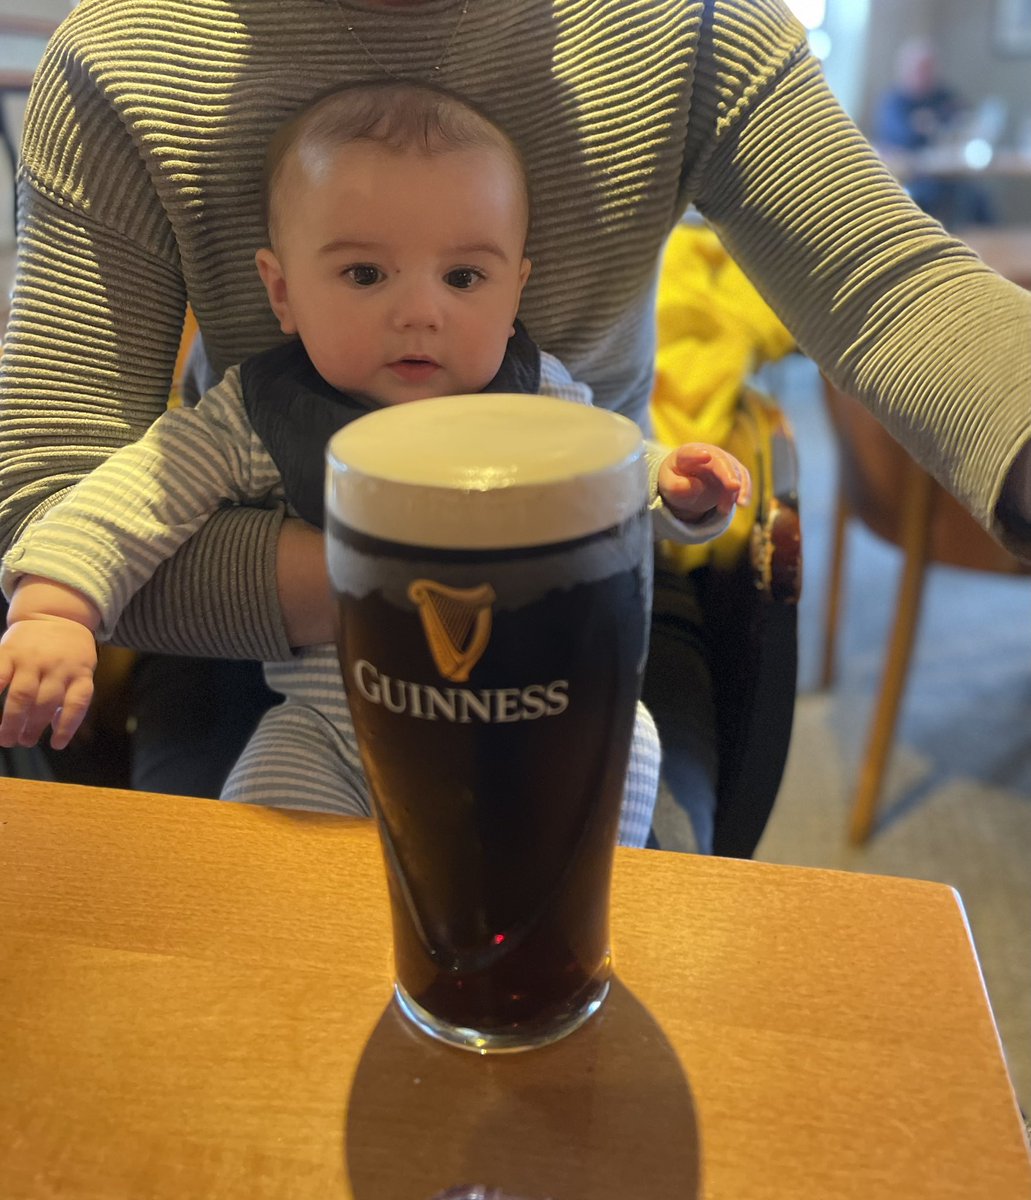 We moving from solids back to liquids @GuinnessIreland